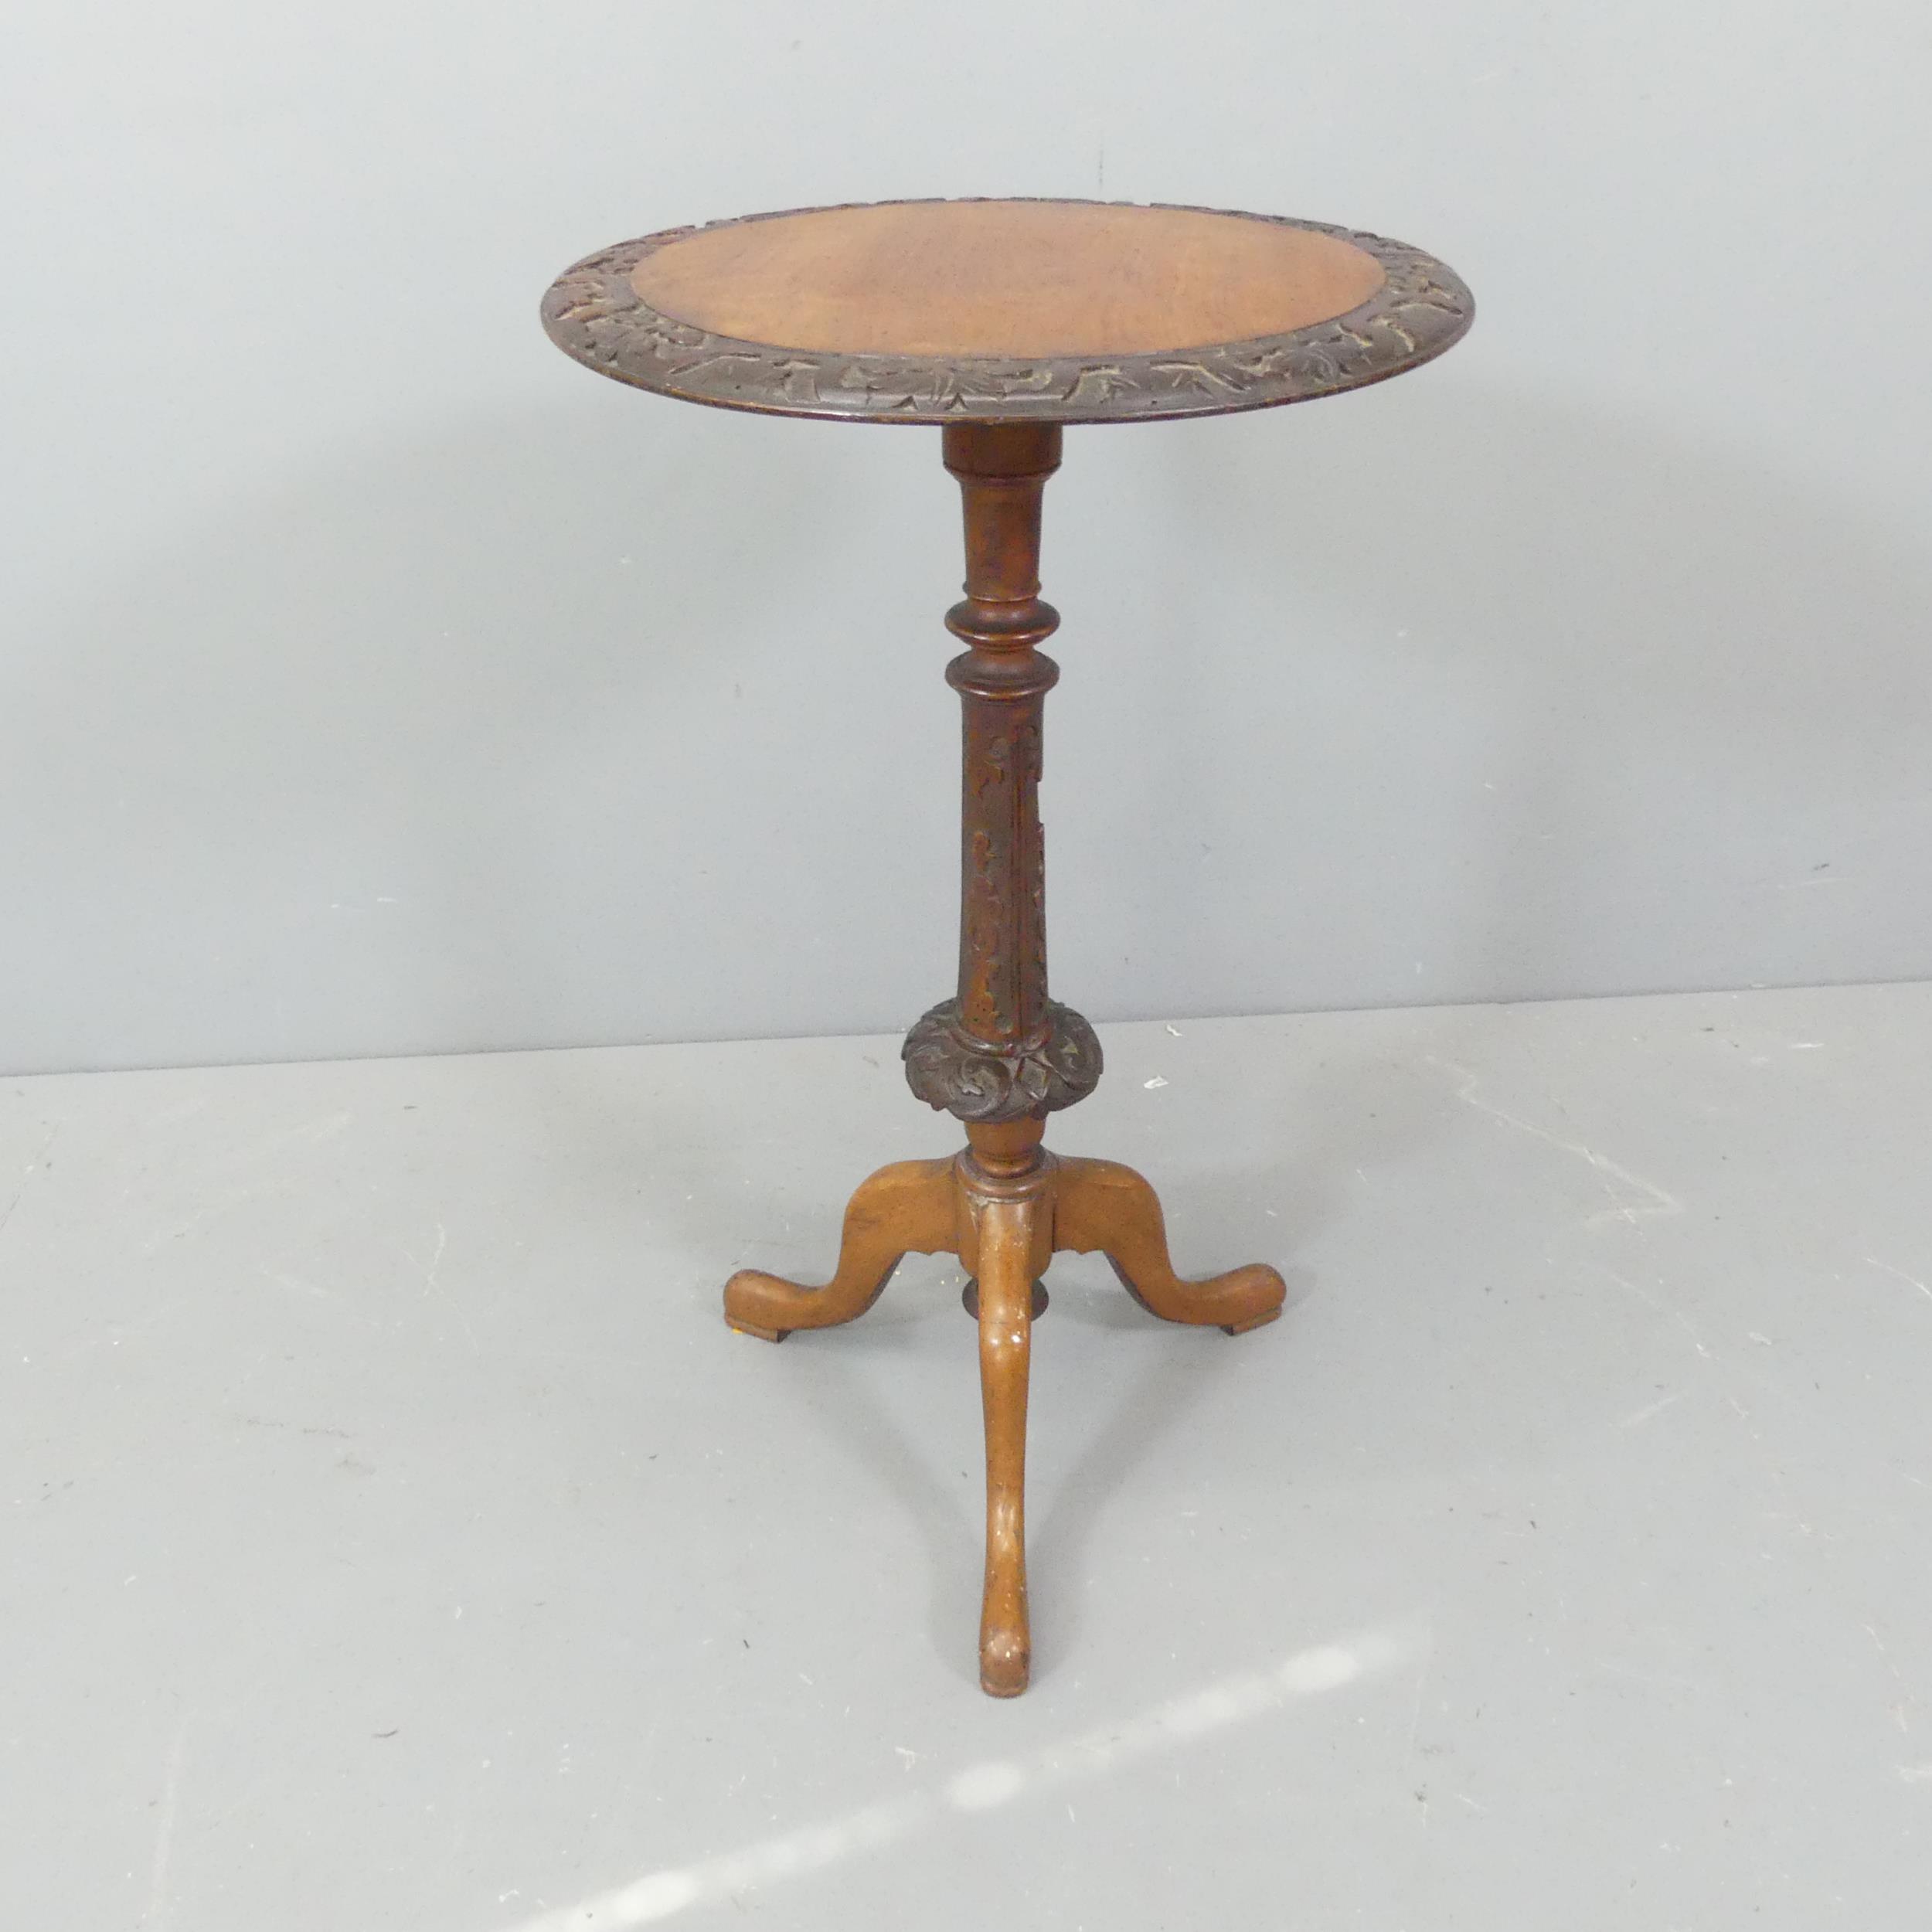 A Victorian mahogany and walnut circular topped occasional table, with carved decoration and